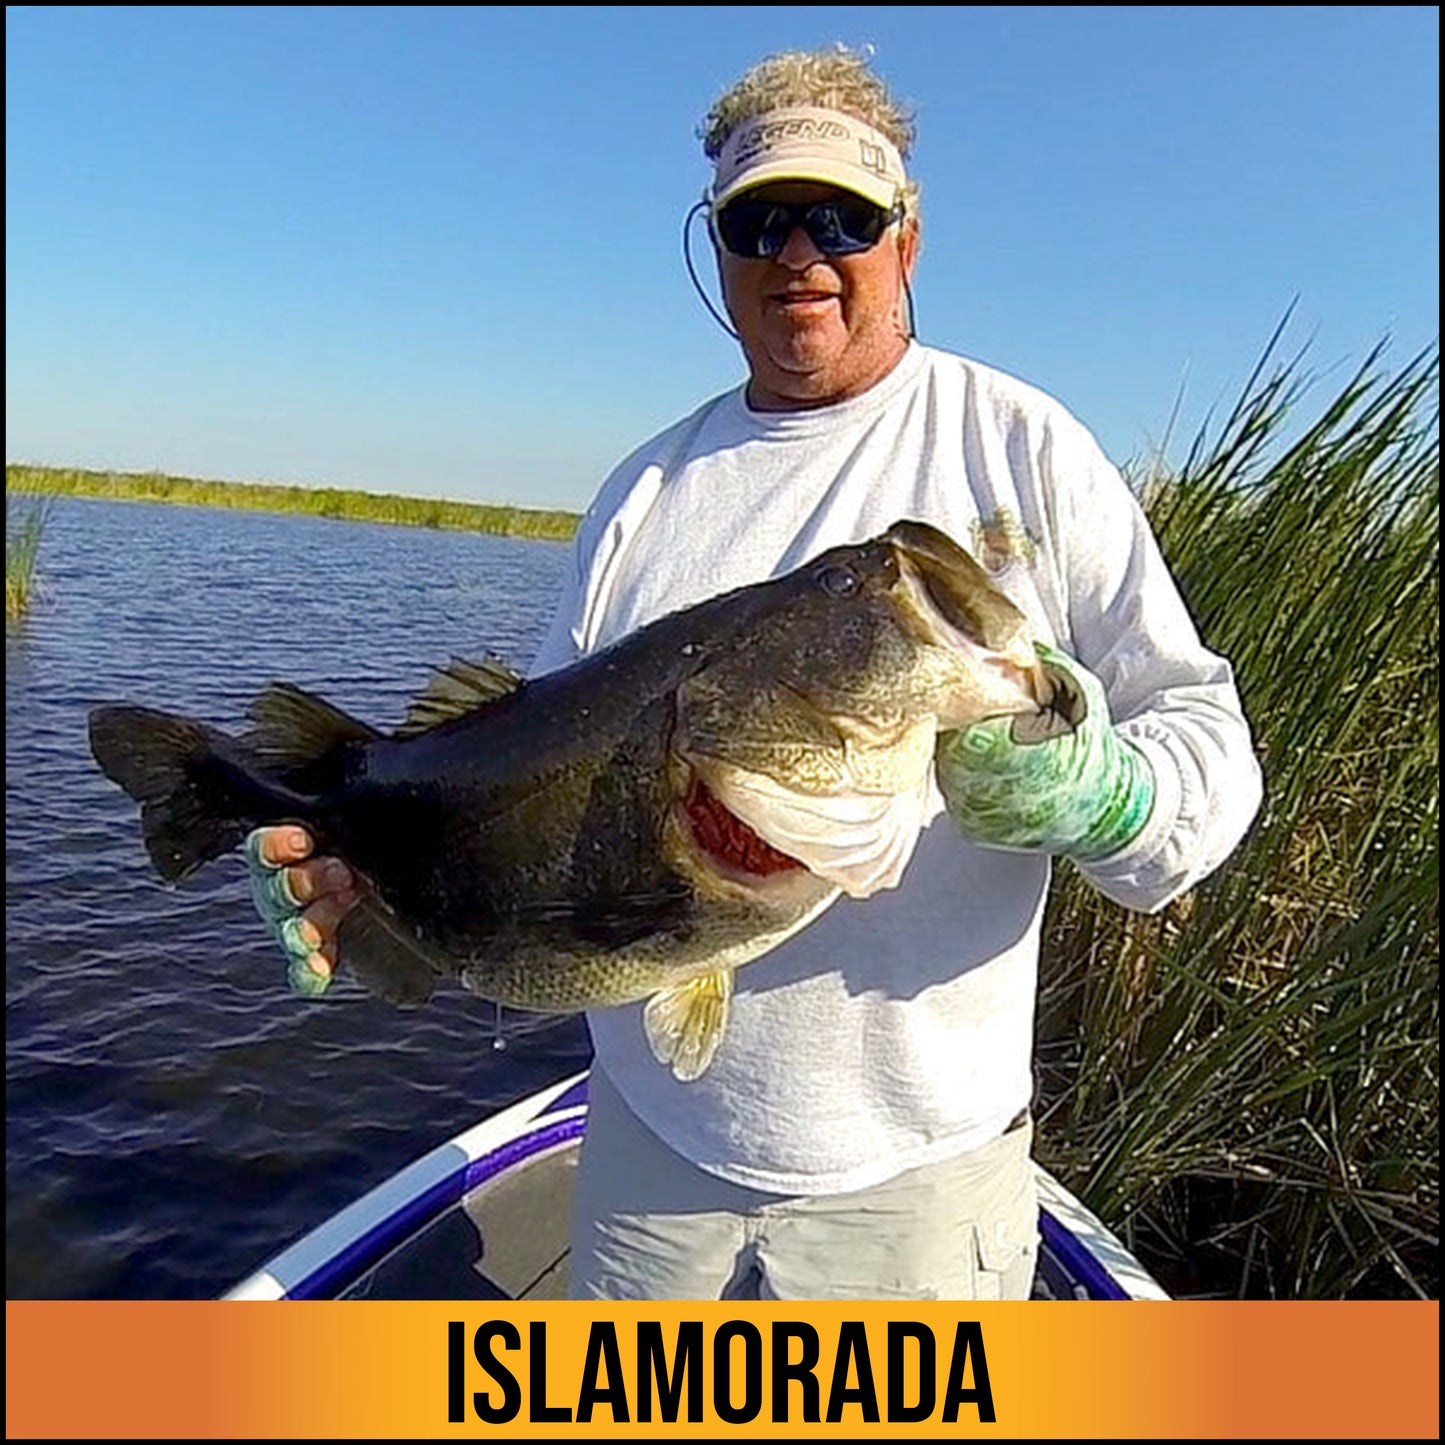 The Islamorada Sun Glove is the most popular fishing model in our sun protection line. Independently tested and verified, it is rated at the maximum protection of UPF 50+. Providing both hand and wrist protection, this glove is great for any of your outdoor adventures.